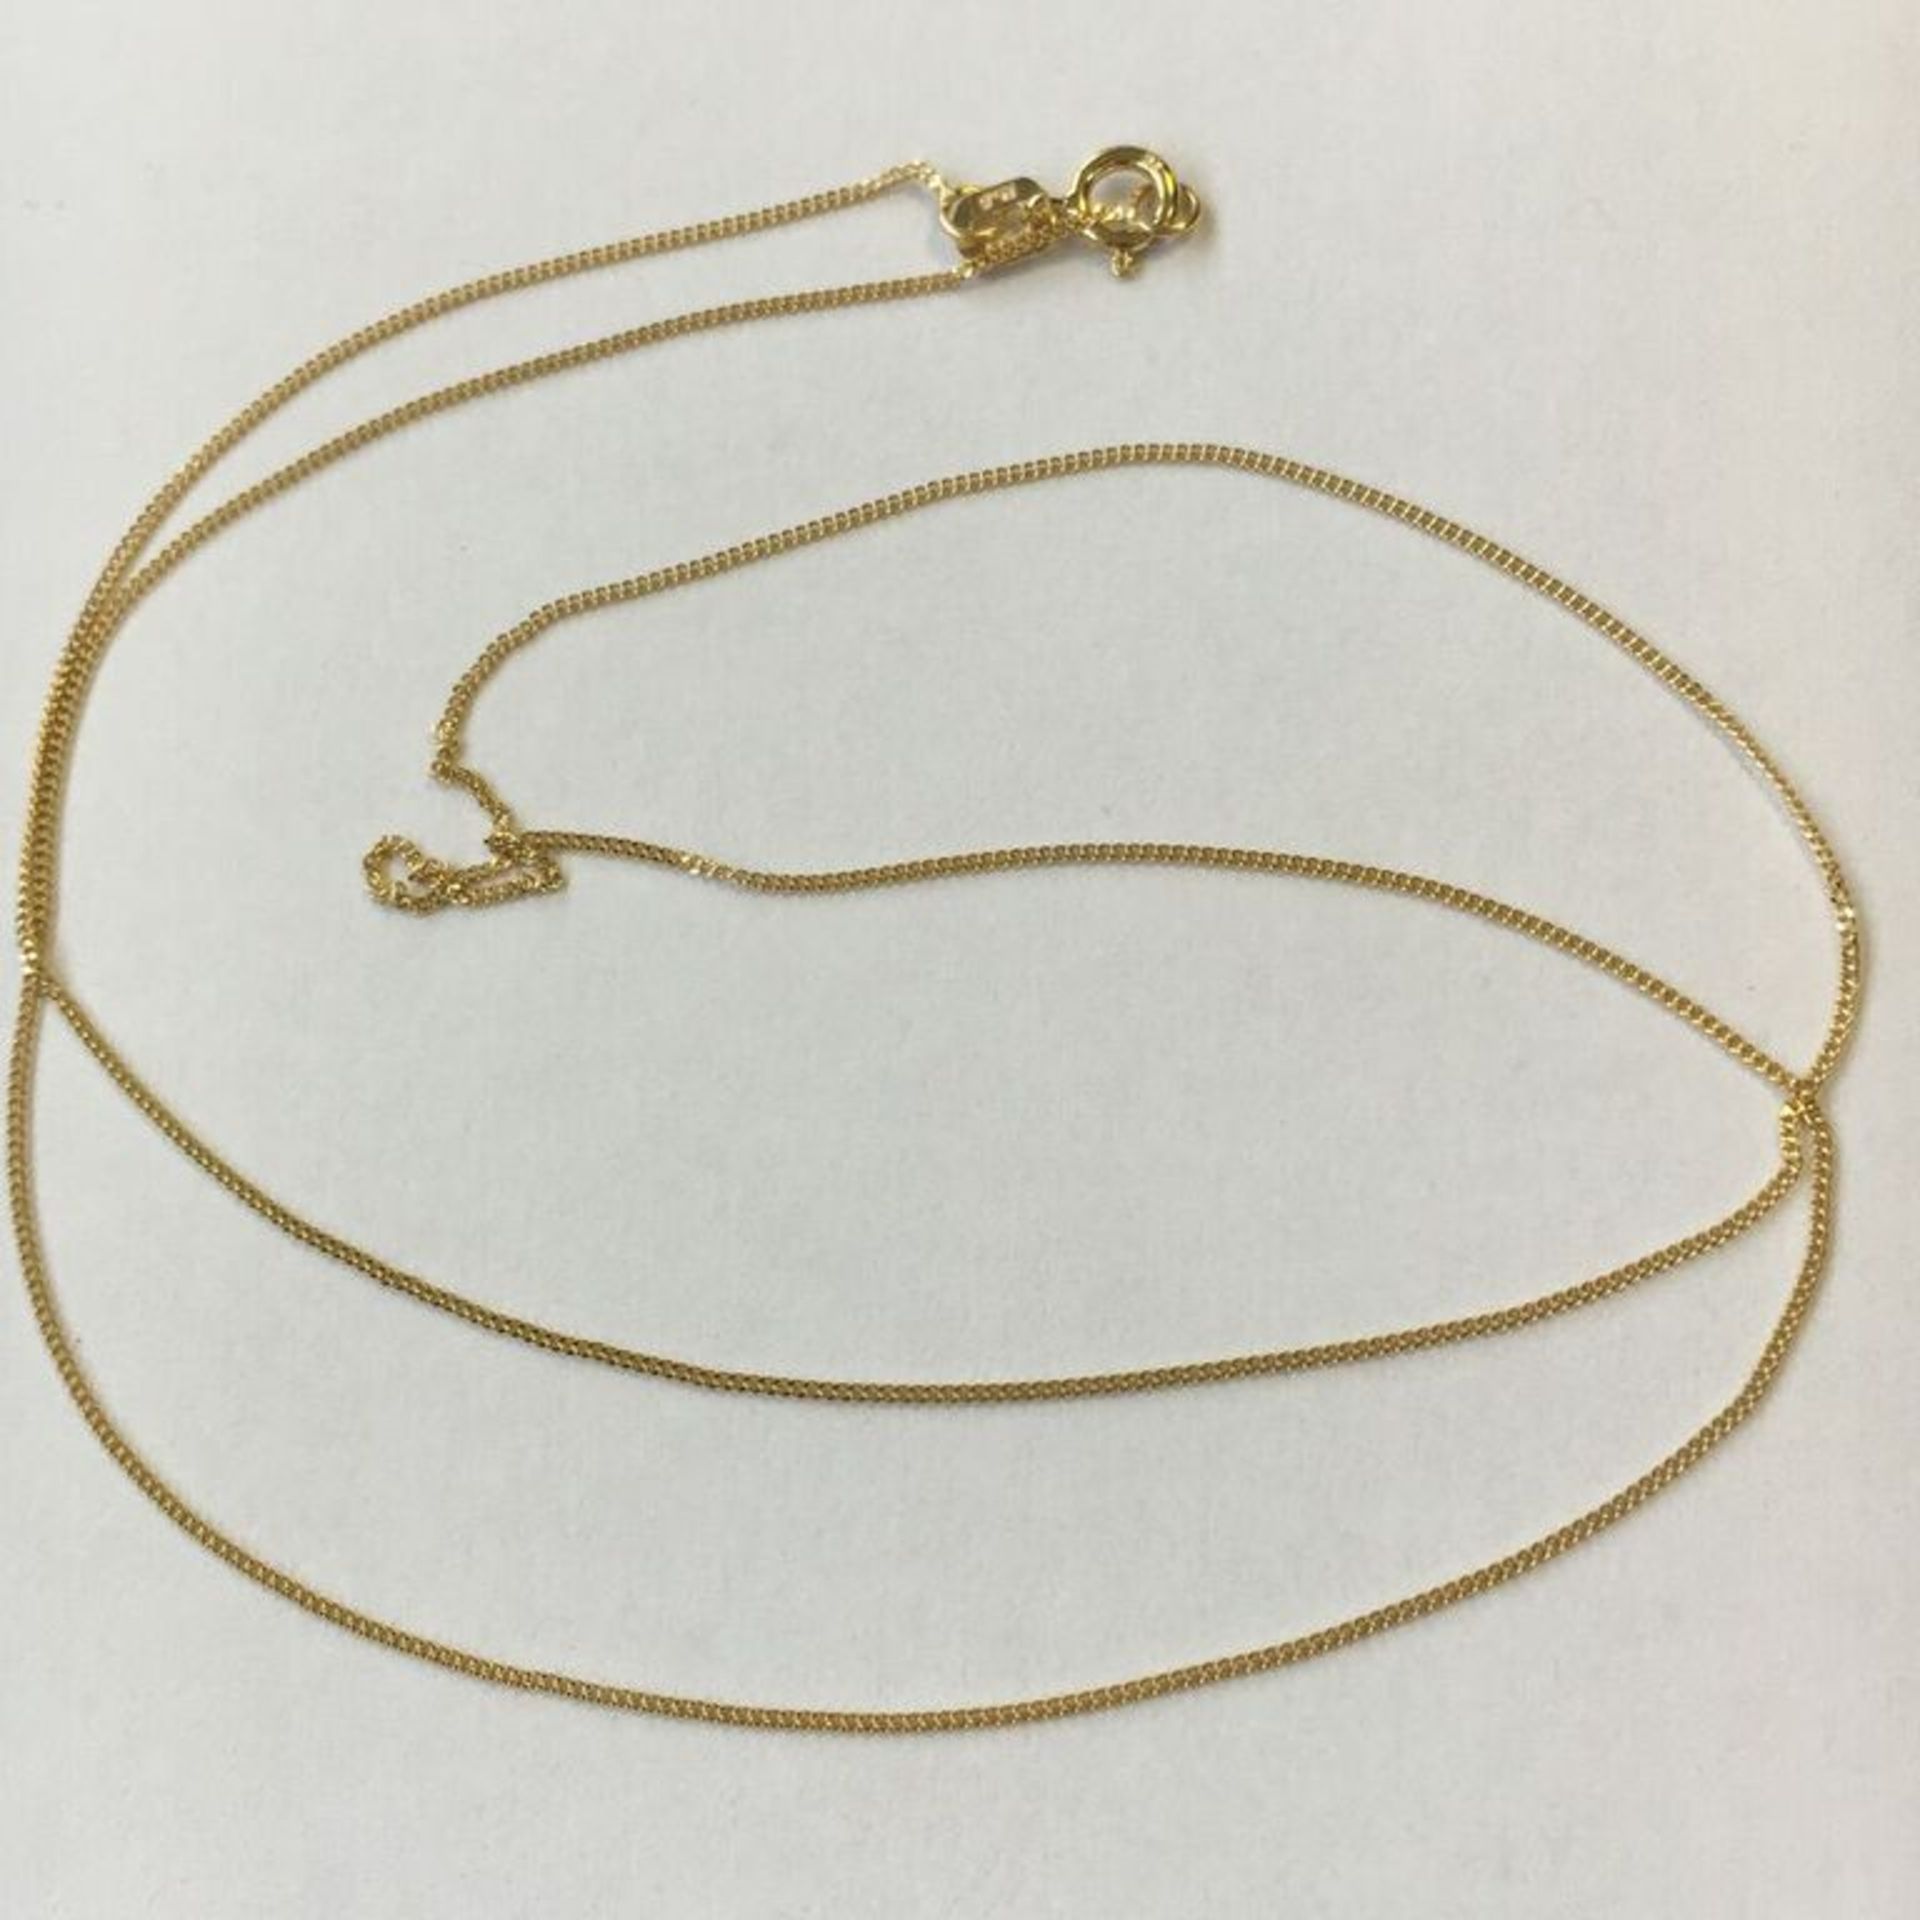 HALLMARKED 9CT GOLD CURB CHAIN NECKLACE. 18". FREE UK DELIVERY. NO VAT.